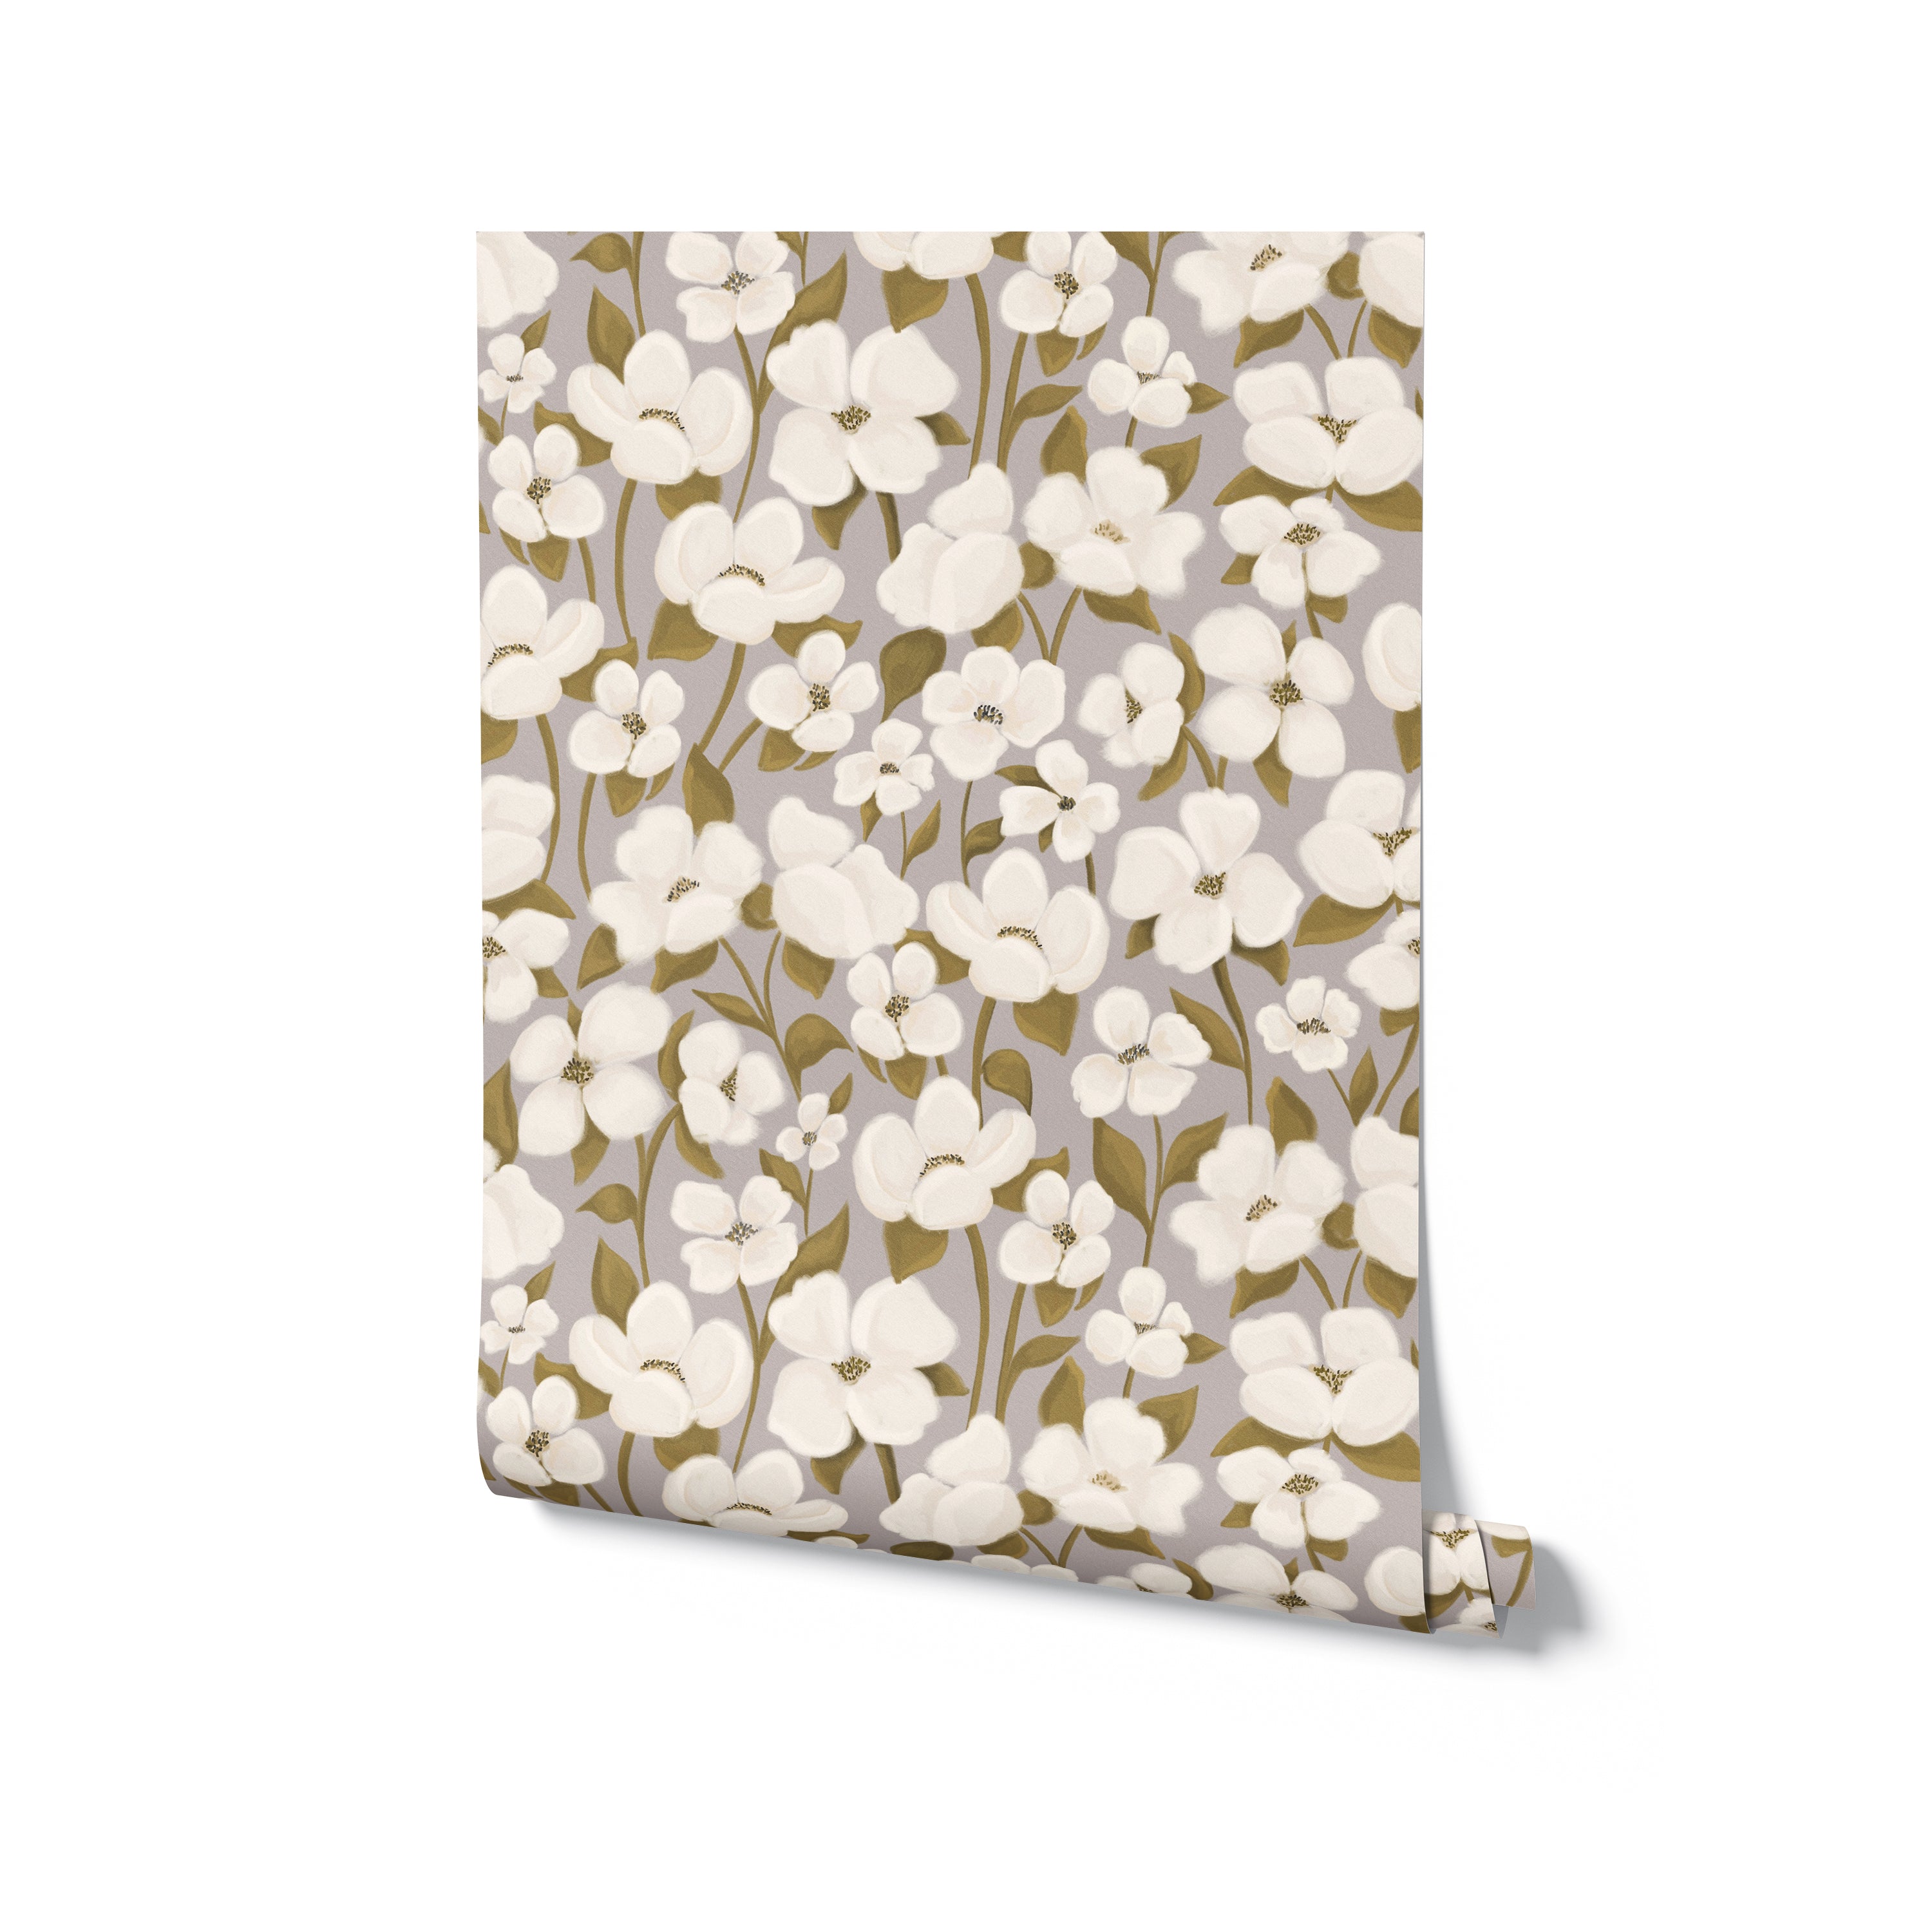 A roll of White Fleur Wallpaper depicting a lush array of white flowers and green foliage on a soft olive backdrop, rolled up at the corner to showcase the design's elegance and texture.